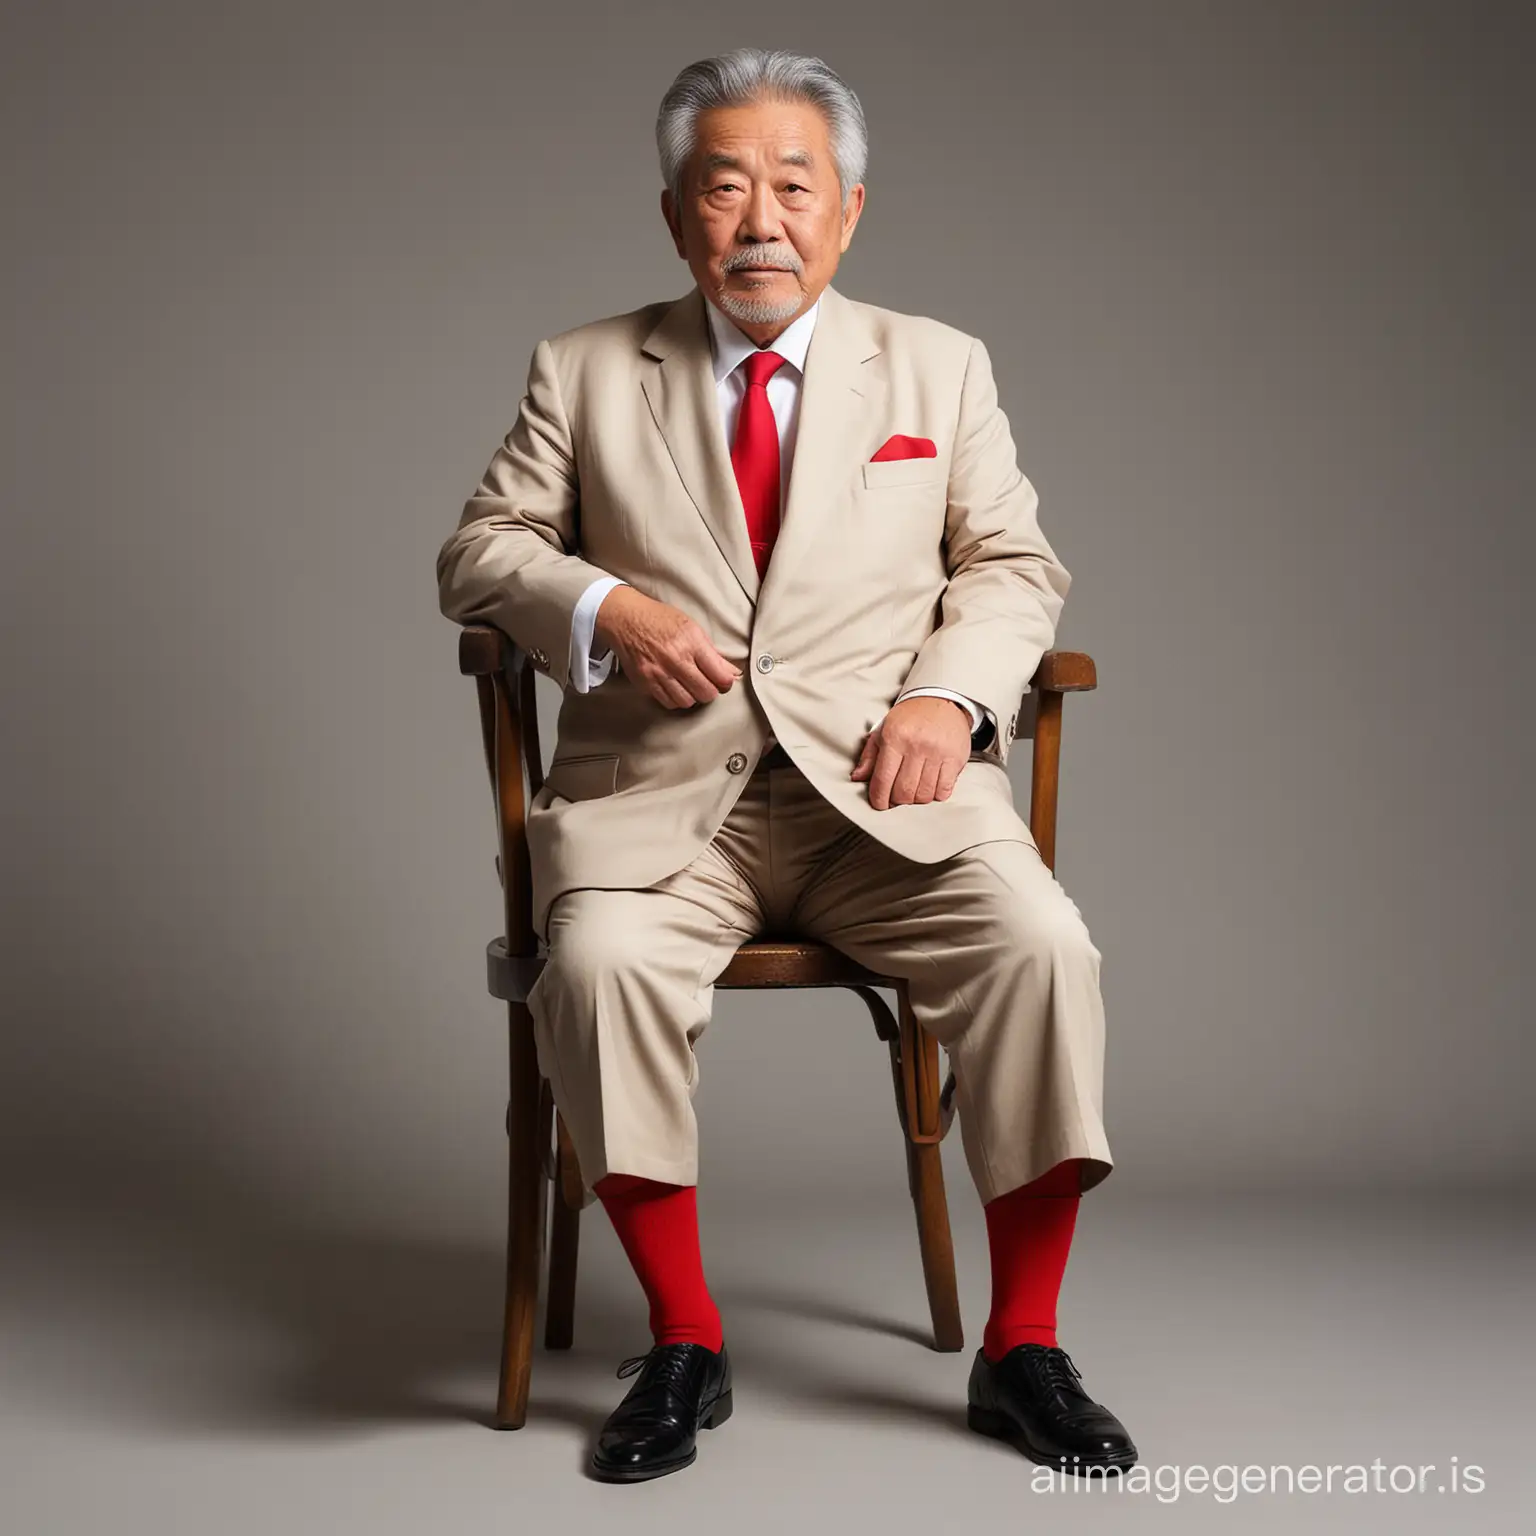 Elderly-Japanese-Gentleman-in-Tan-Suit-Sitting-on-Chair-with-Dramatic-Lighting